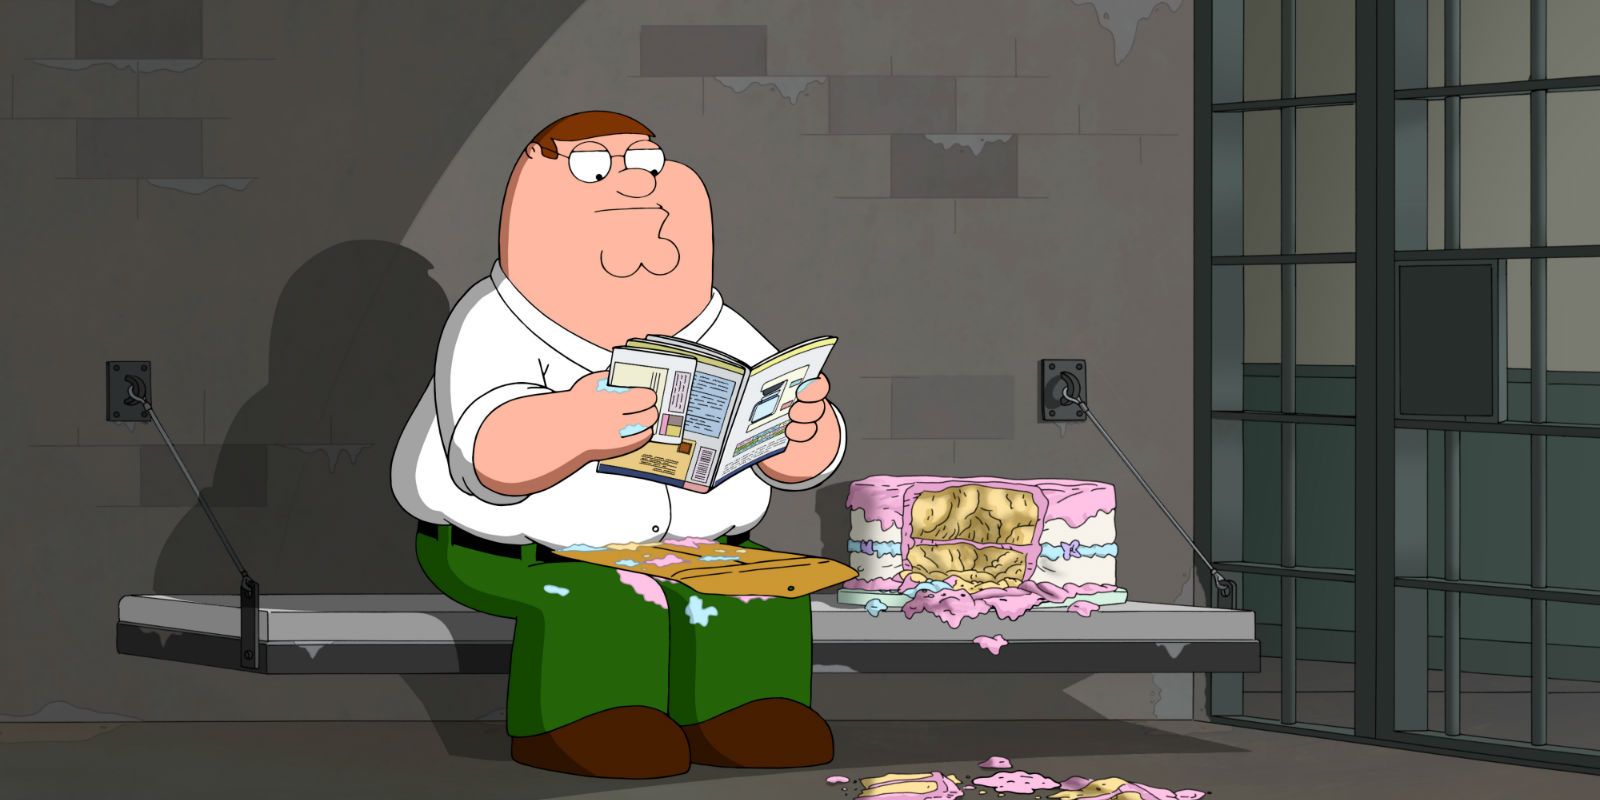 Family Guy S Peter Griffin Should Be In Prison Here Are All His Crimes The title is supposed to be peter griffin meets the avatar, but da has this irrational fear of long titles. peter griffin should be in prison